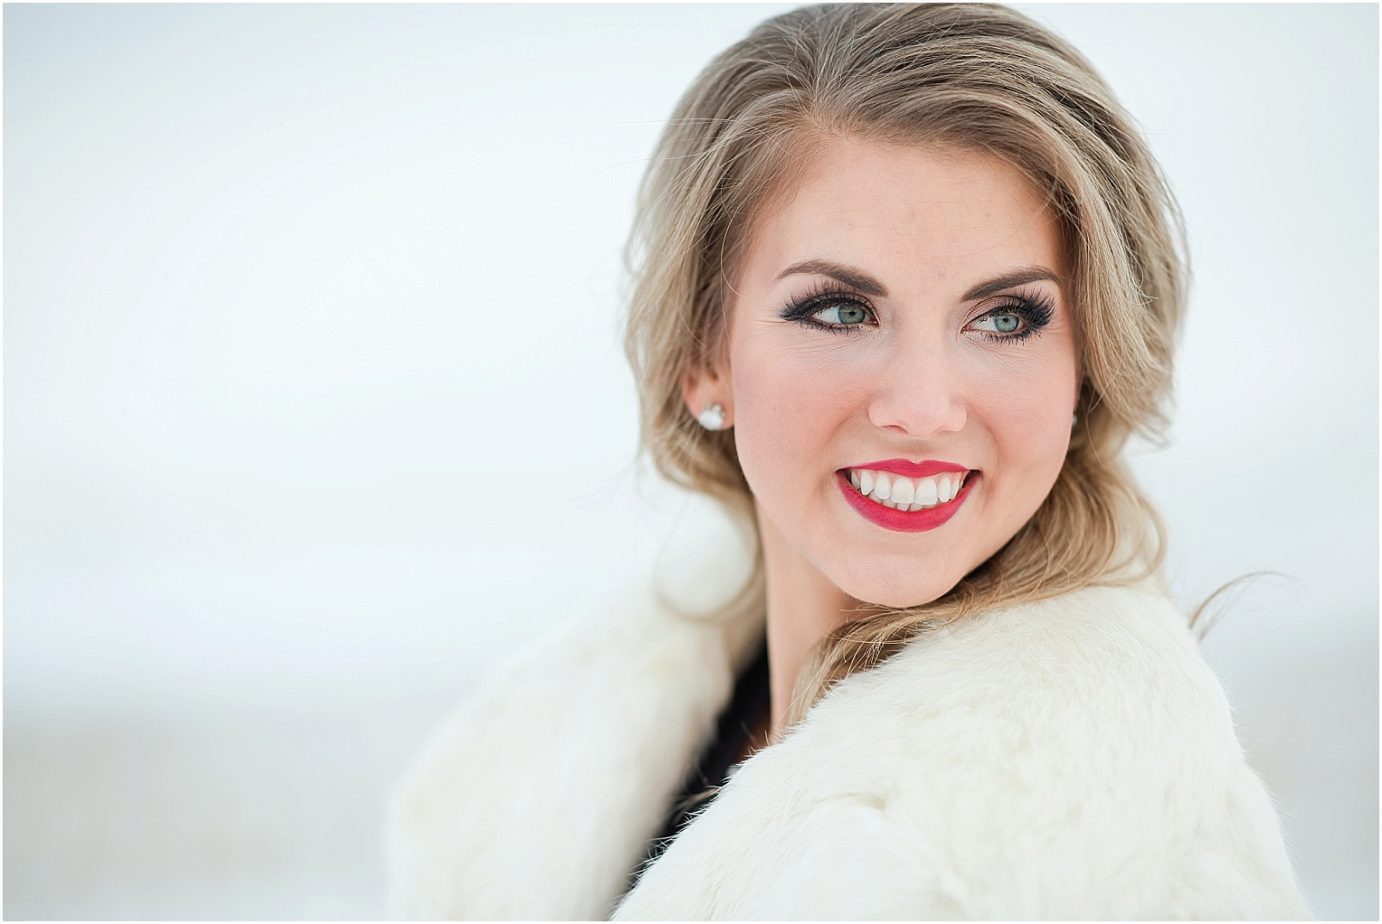 Snowy Portraits with Deidra of 180 consulting